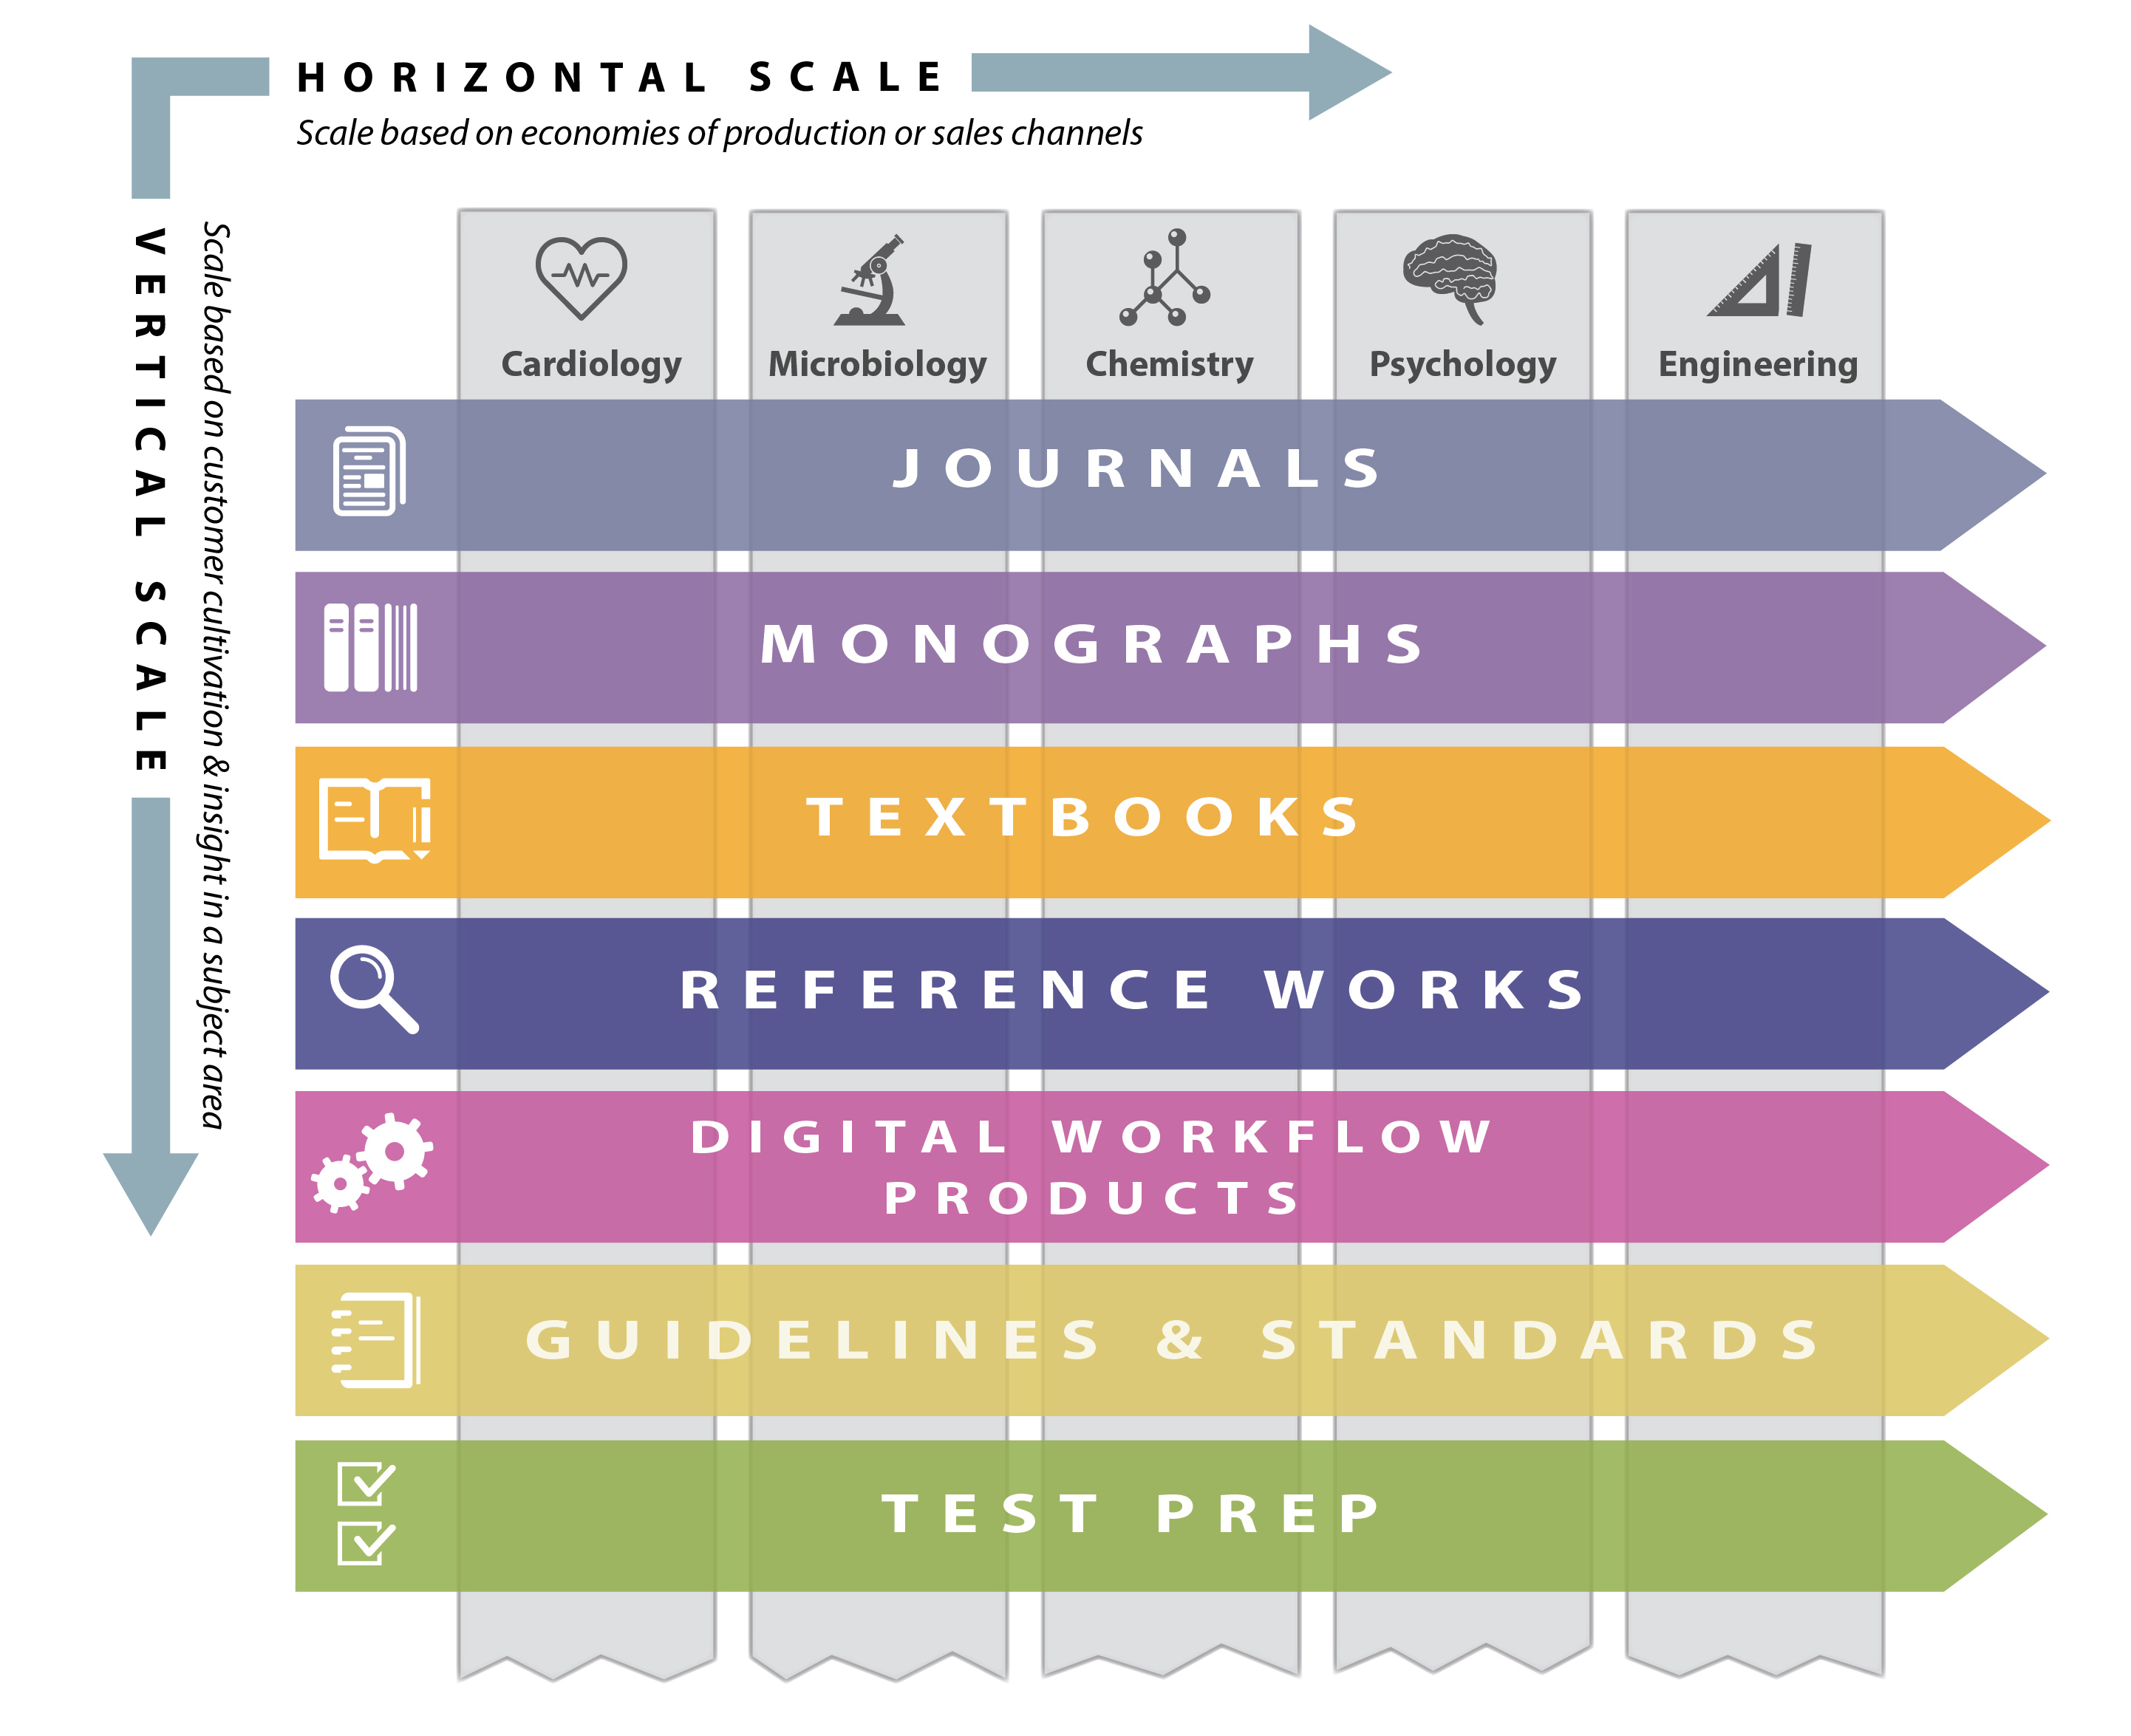 Figure 1: Horizontal vs. Vertical Scale in STM and Scholarly Publishing. Image by Clarke & Company, all rights reserved.